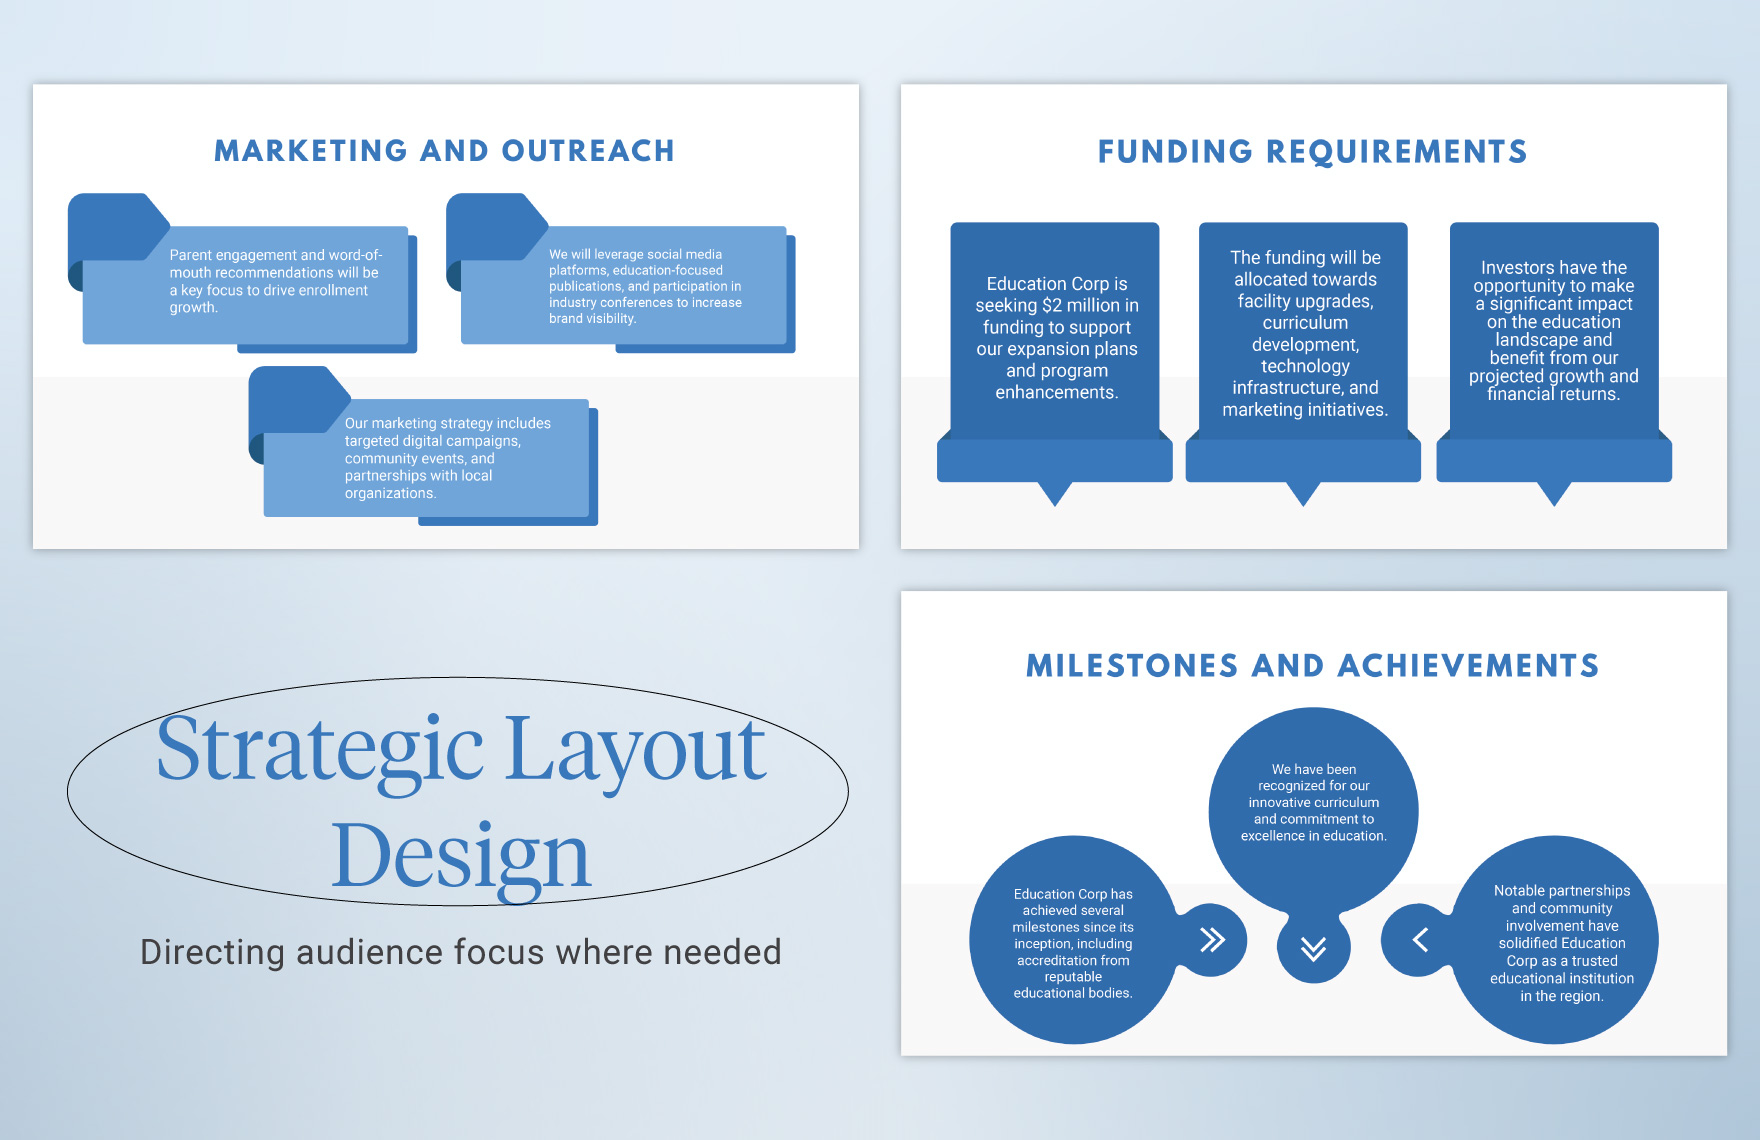 Education Pitchdeck Template